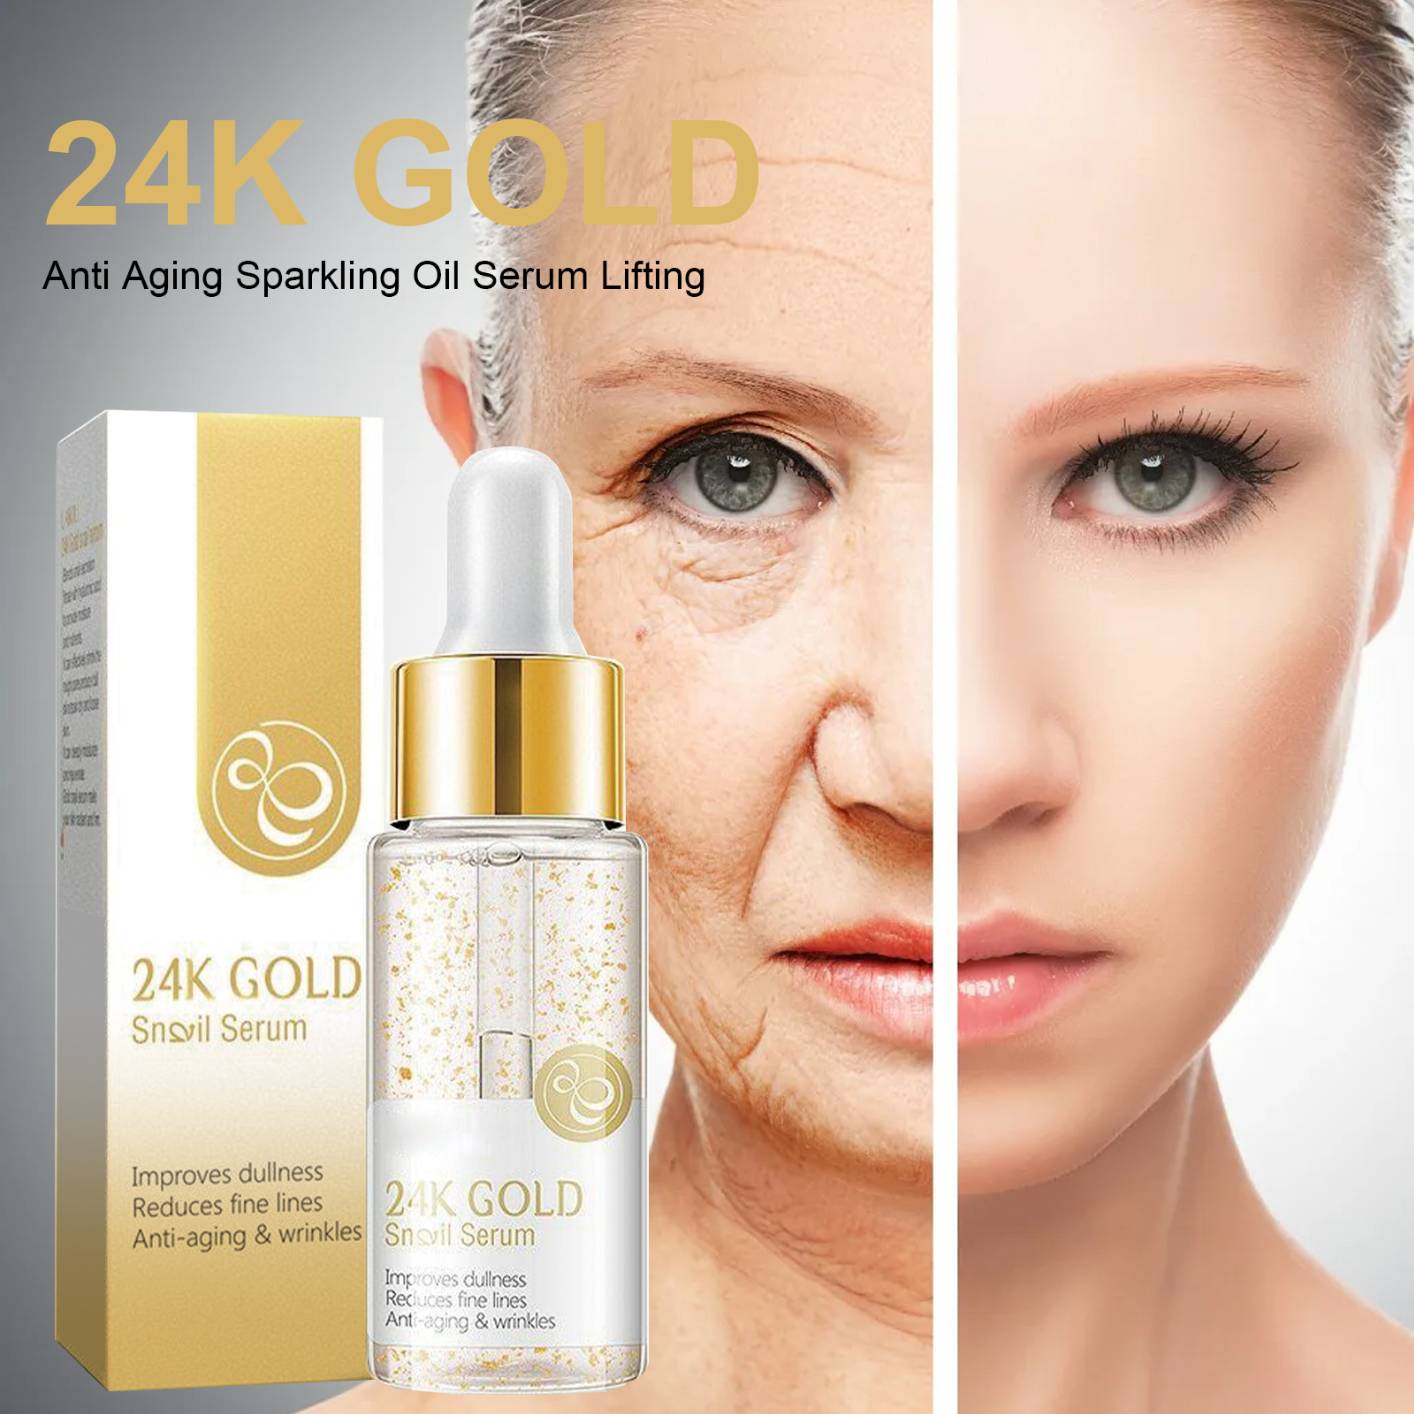 24K Gold Anti Aging Shining Oil Essence Firming Skin Anti-wrinkle Remove Fine Line Wrinkles Improve Dullness Lifting Facial Care